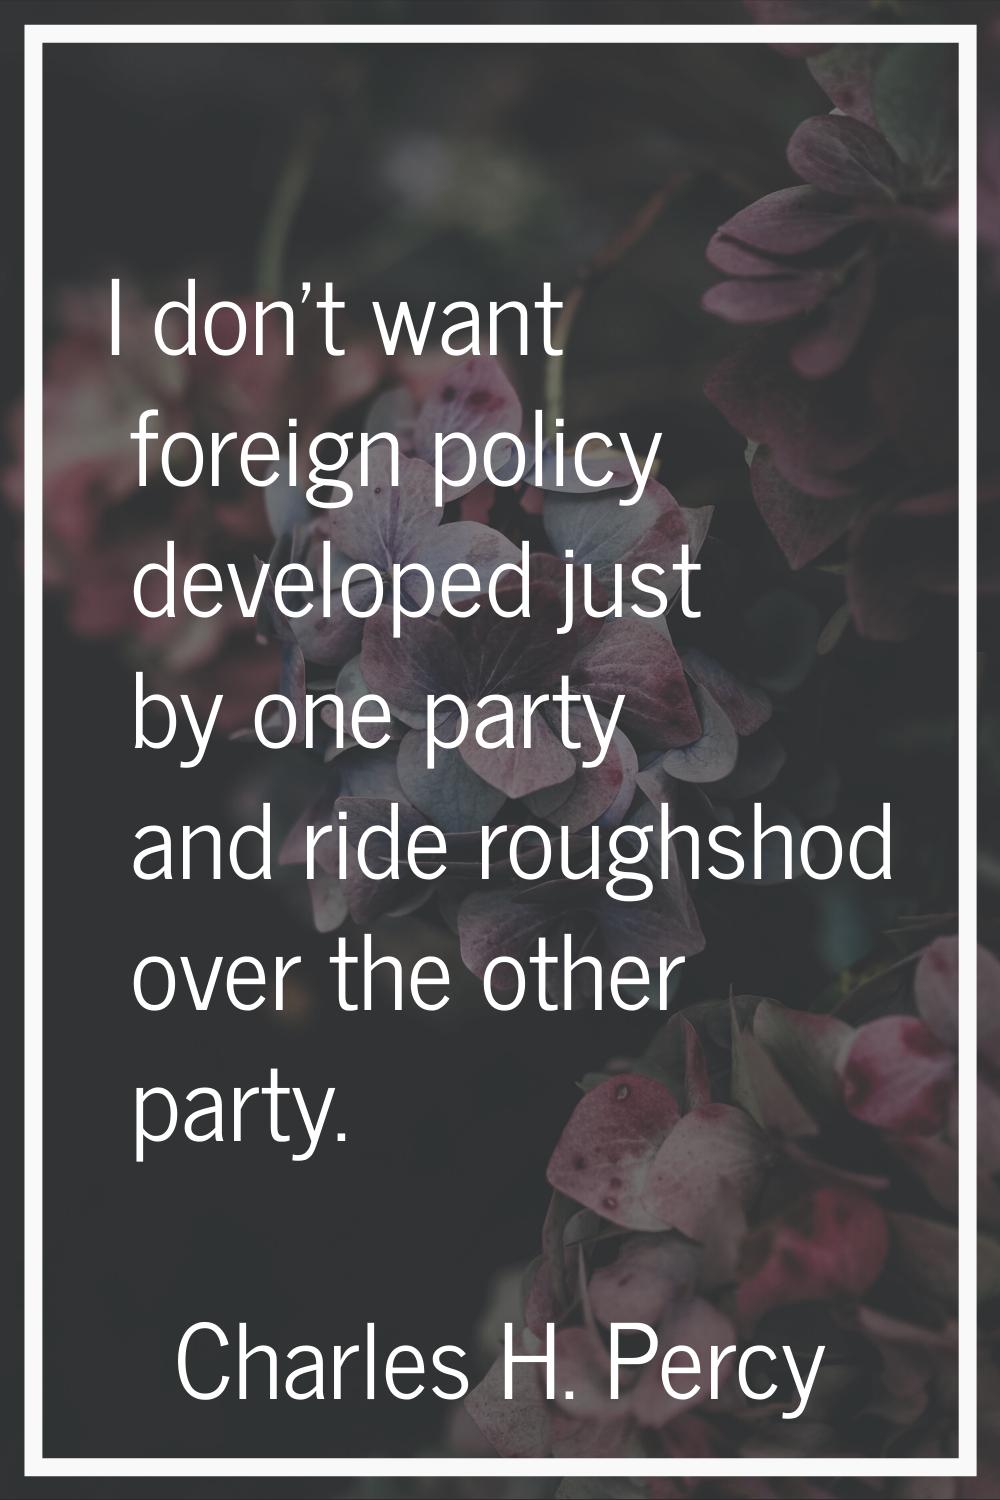 I don't want foreign policy developed just by one party and ride roughshod over the other party.